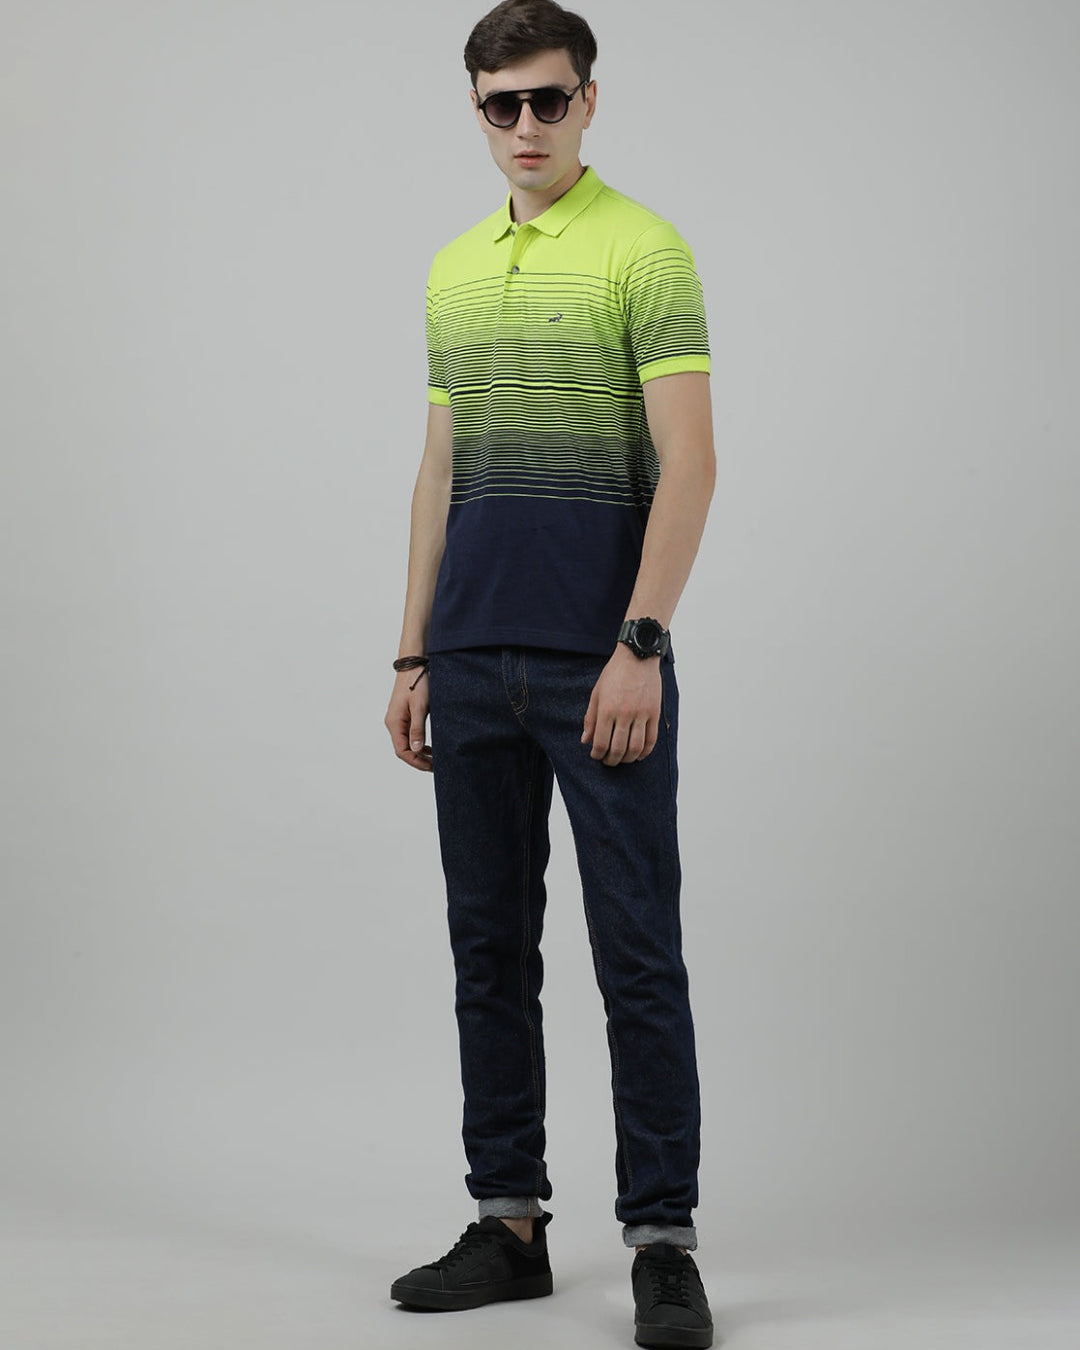 Crocodile Casual Blue T-Shirt Half Sleeve Slim Fit Jersey Engineering Stripe with Collar for Men